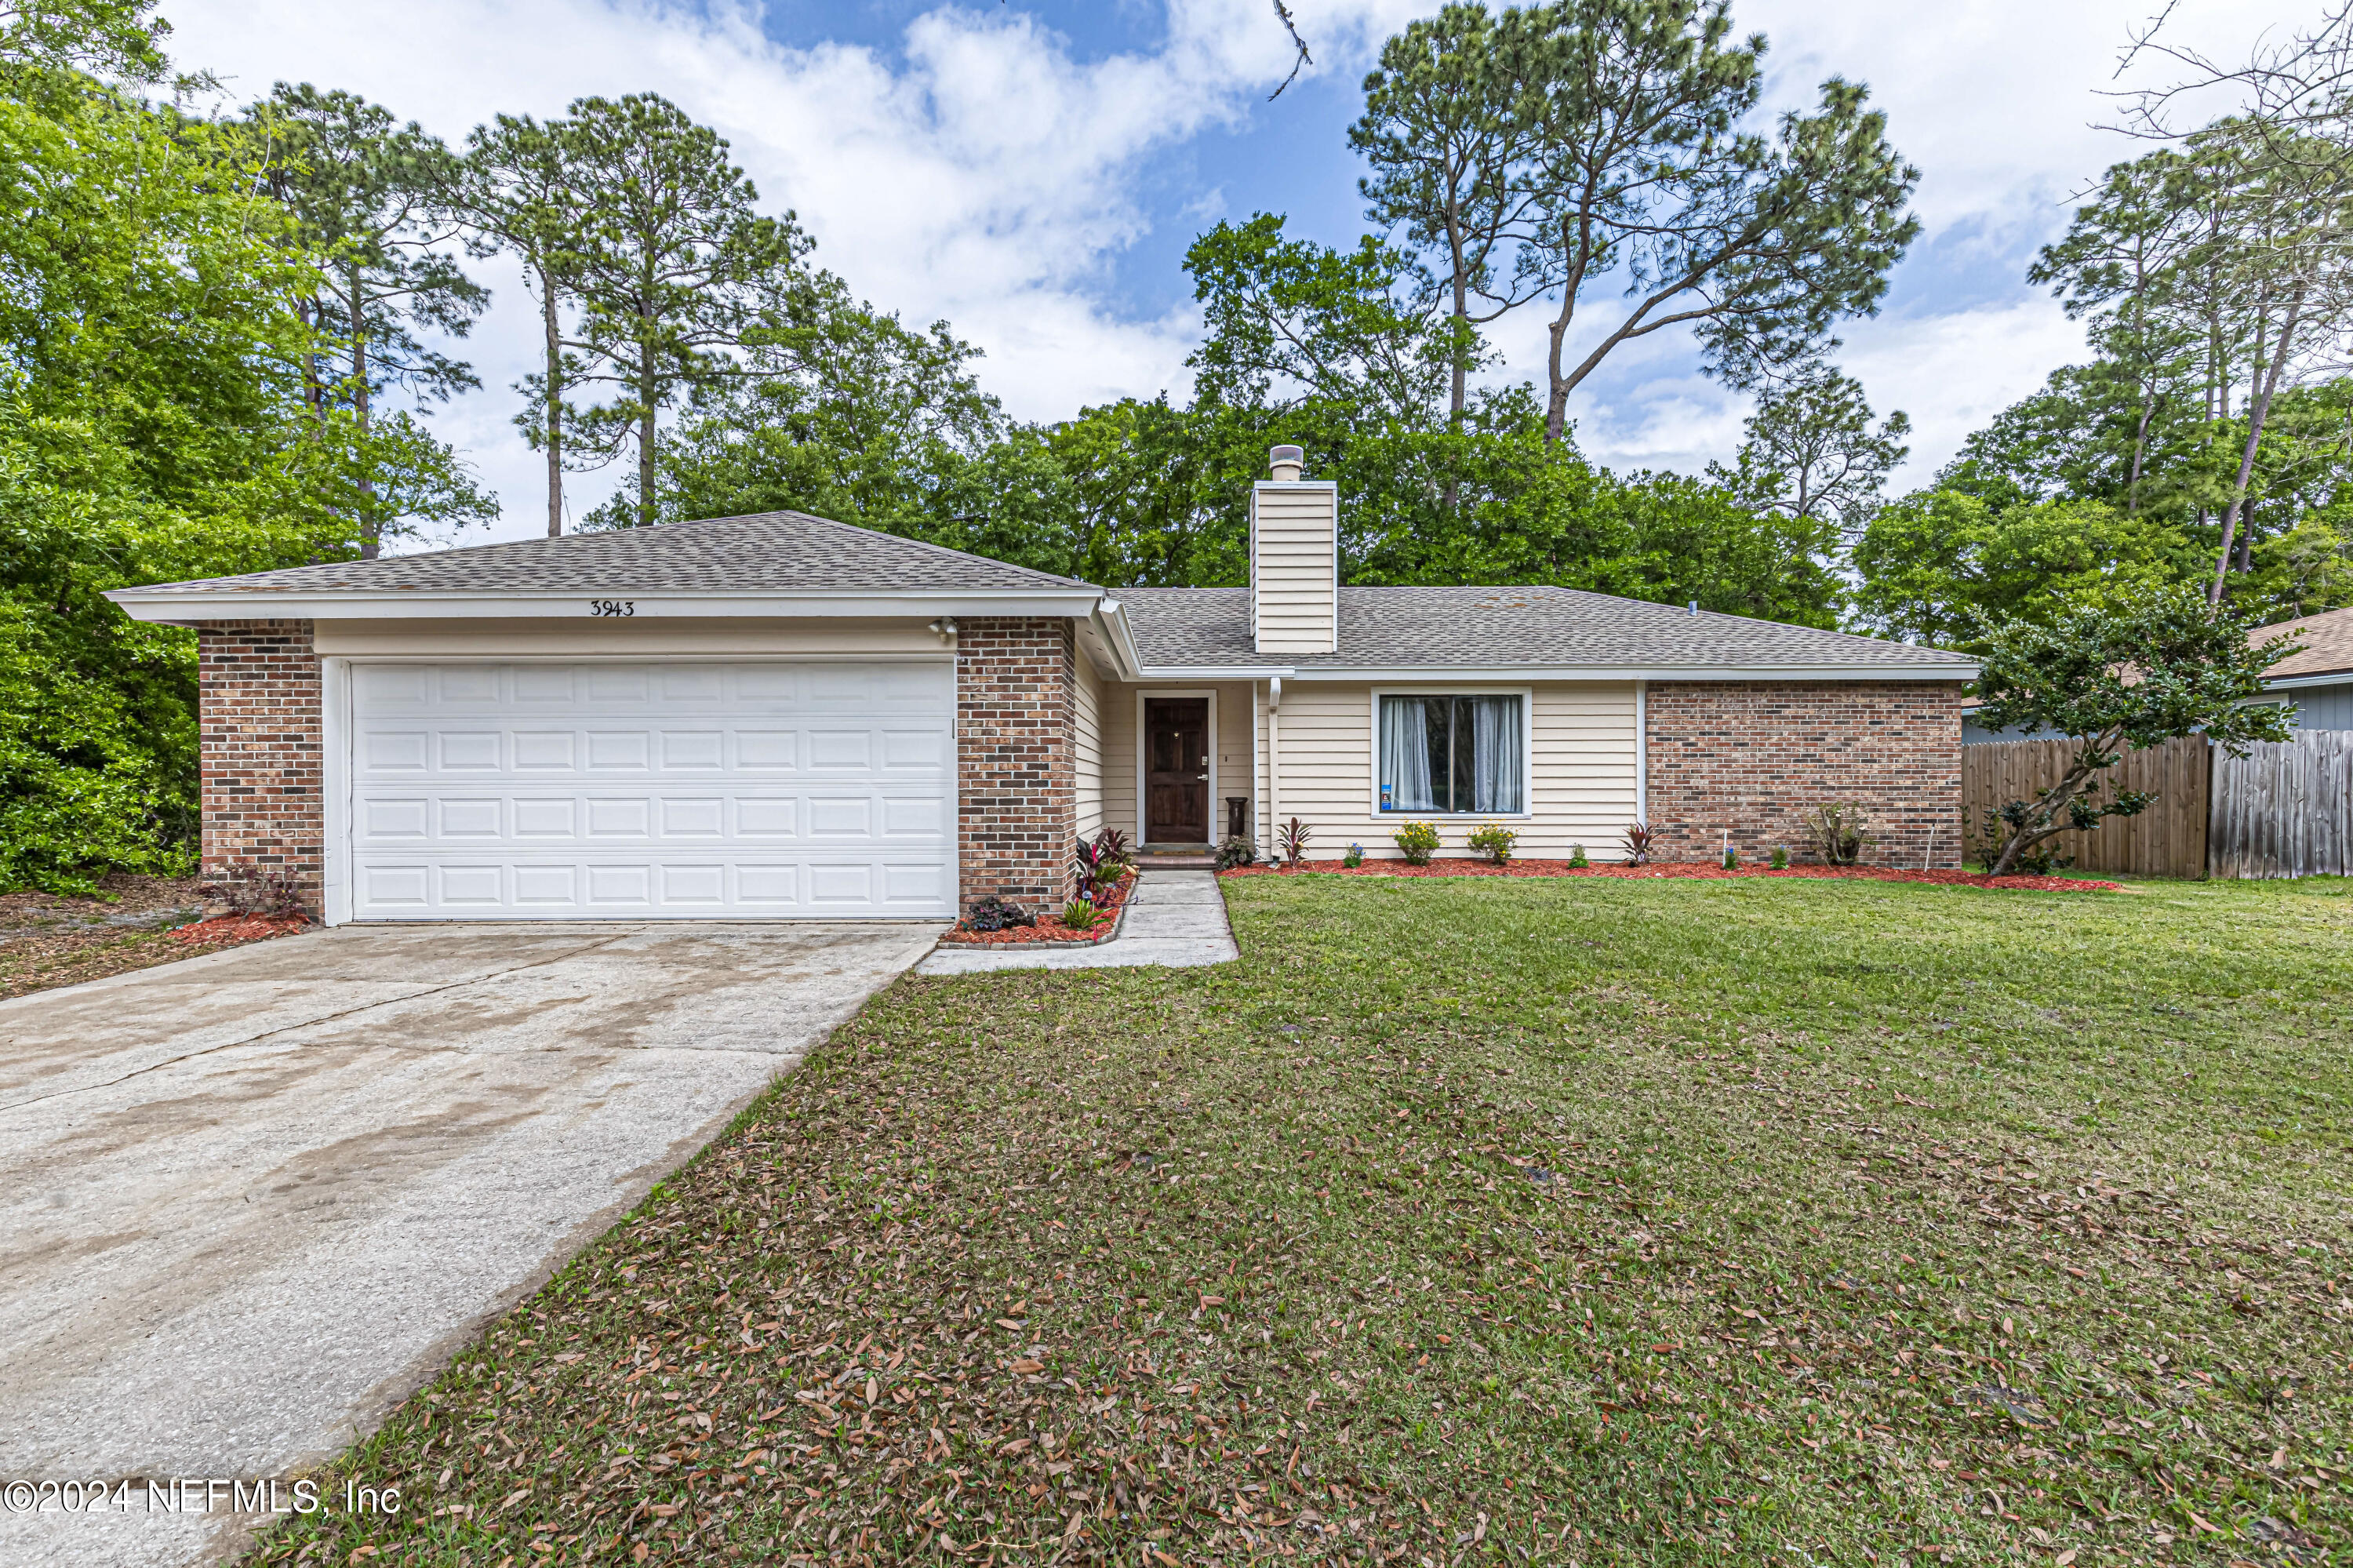 Jacksonville, FL home for sale located at 3943 OLYMPIC Lane, Jacksonville, FL 32223